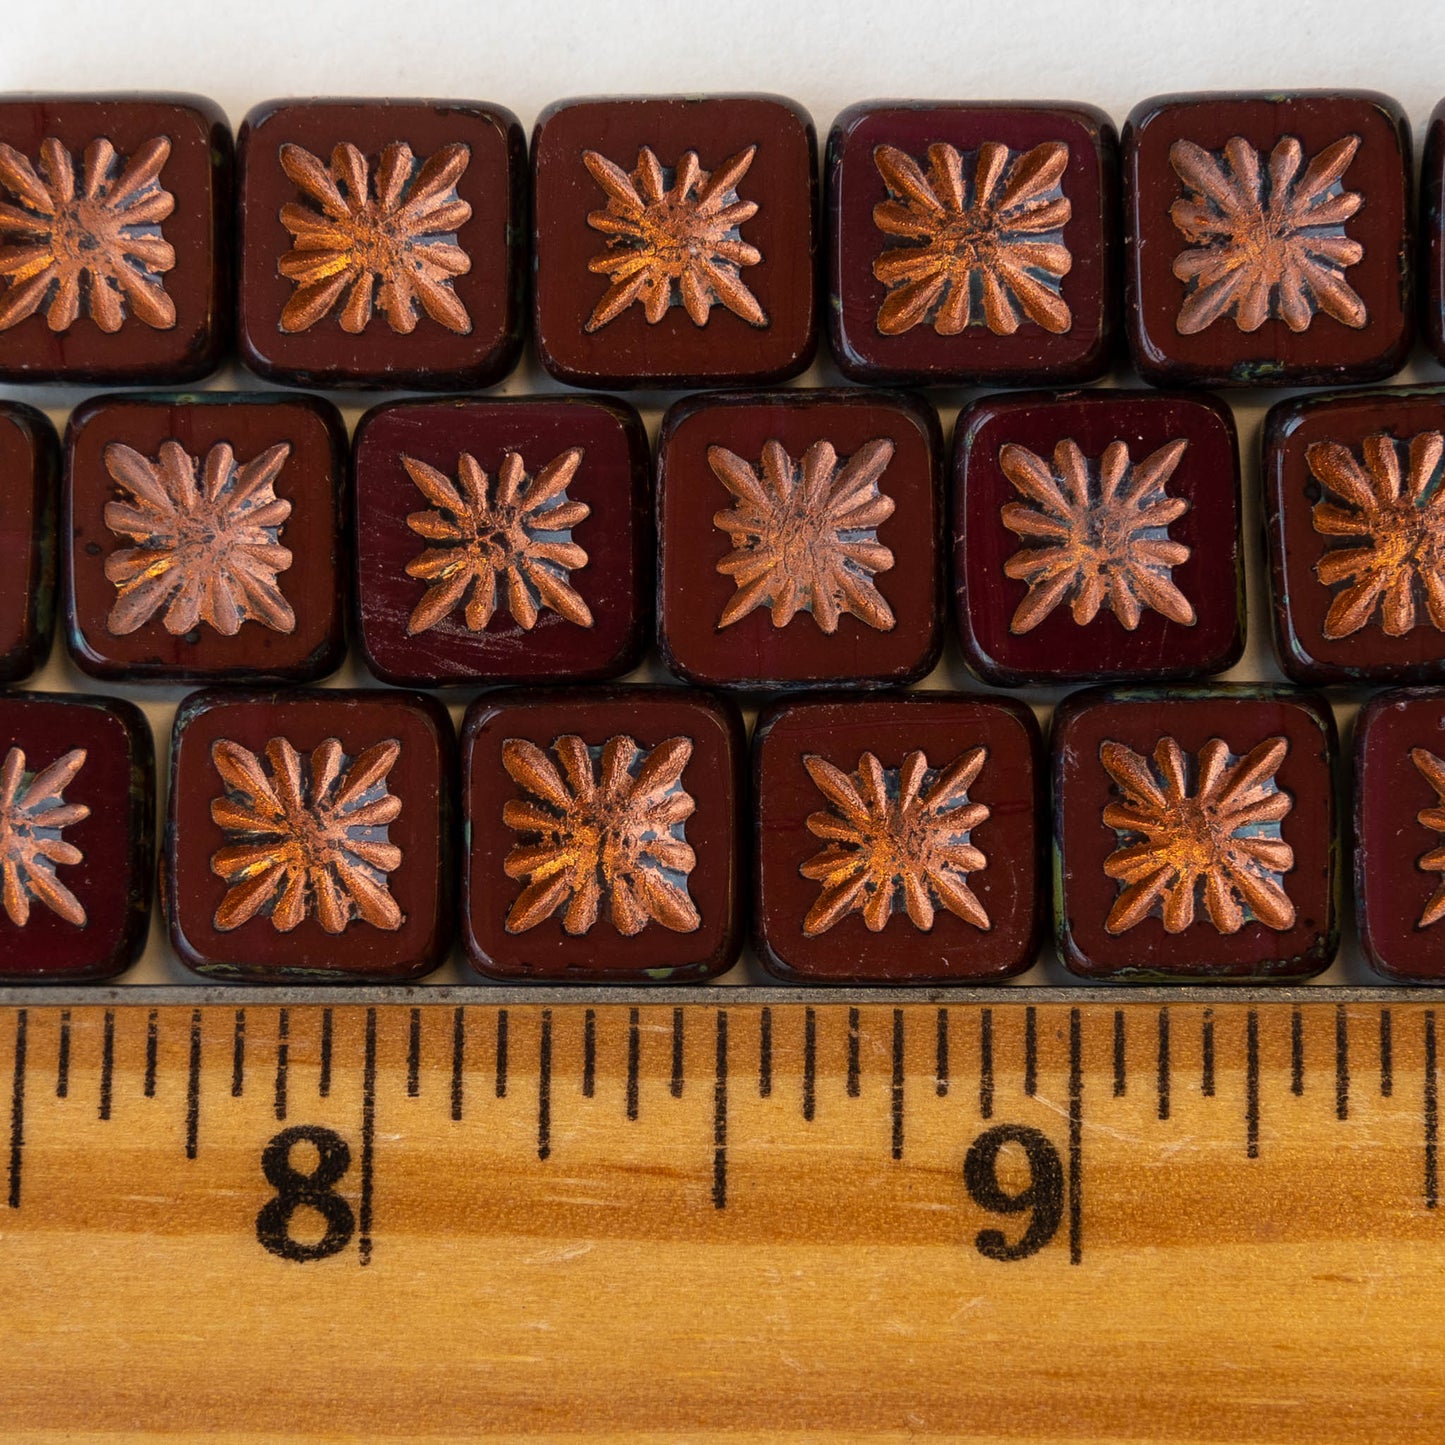 10mm Glass Tile Beads - Deep Maroon Red with Copper Wash - 10 or 30